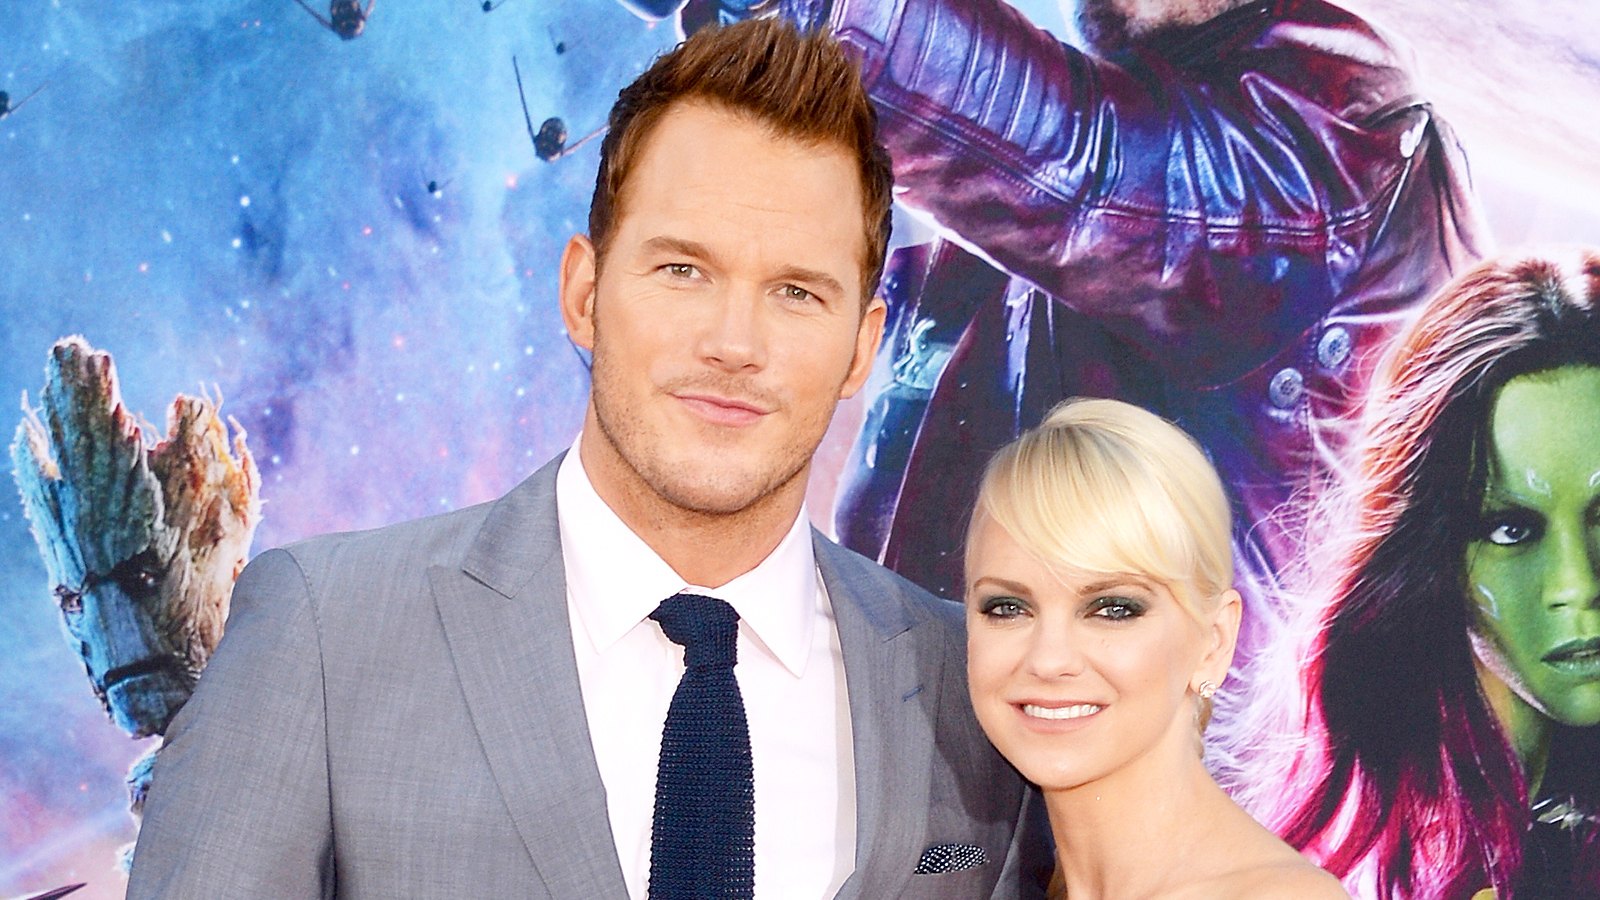 Chris Pratt and Anna Faris attend the premiere of Marvel's 'Guardians of the Galaxy' at the Dolby Theatre in Hollywood on July 21, 2014.